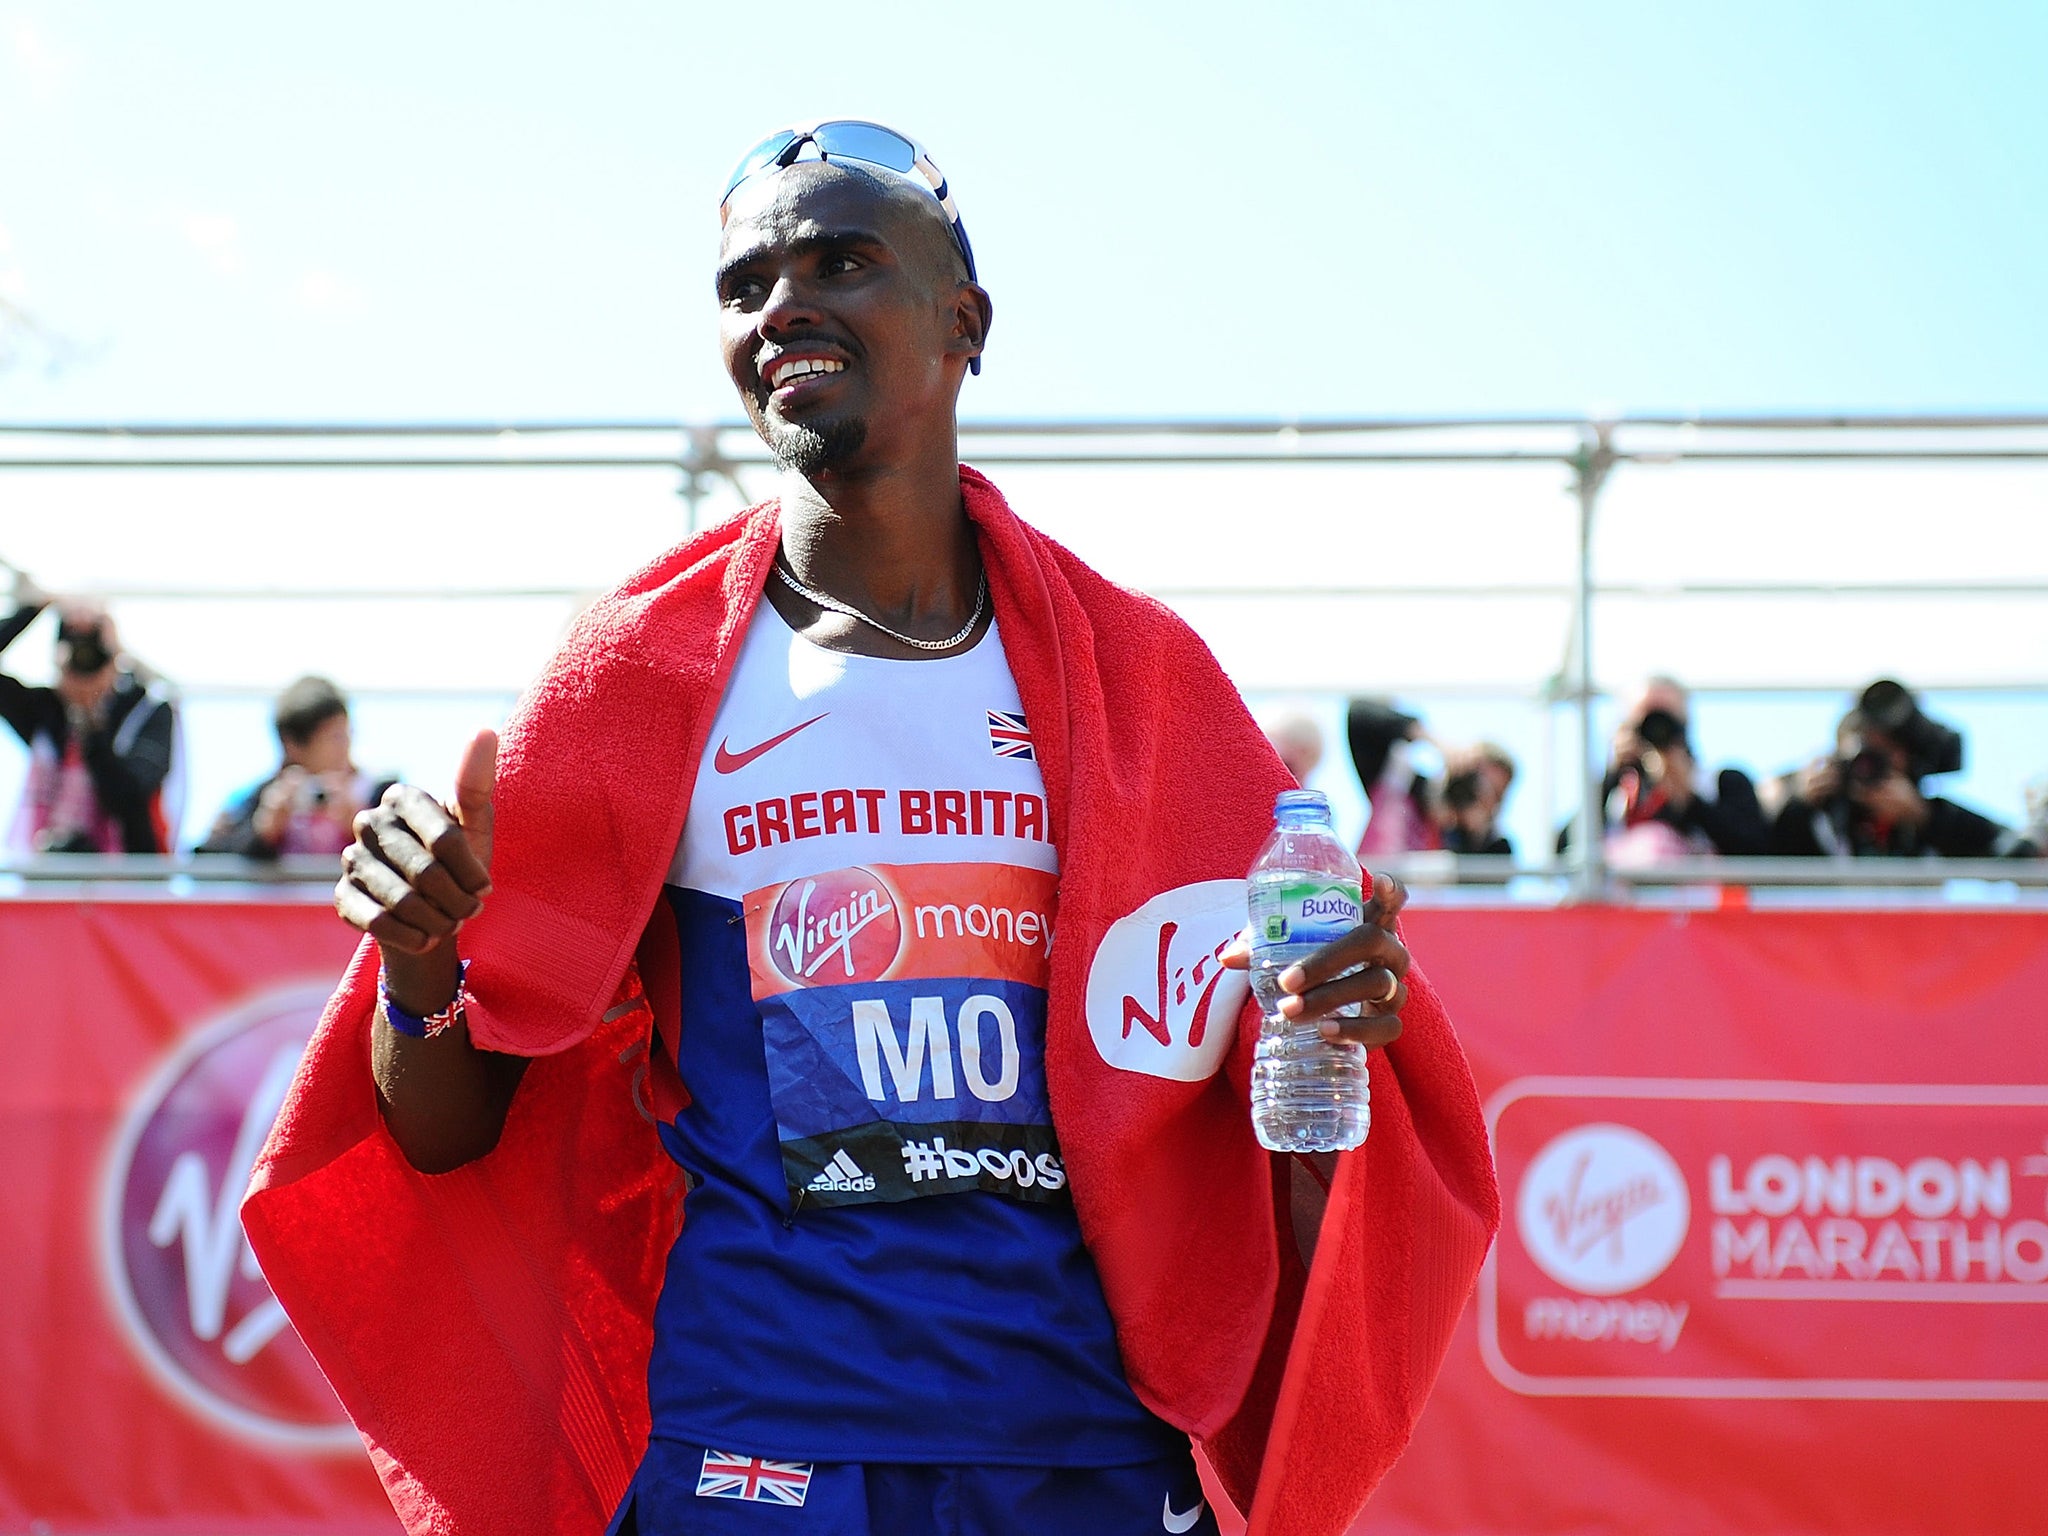 Mo Farah's performance was aided by the controversial supplement L-Carnitine